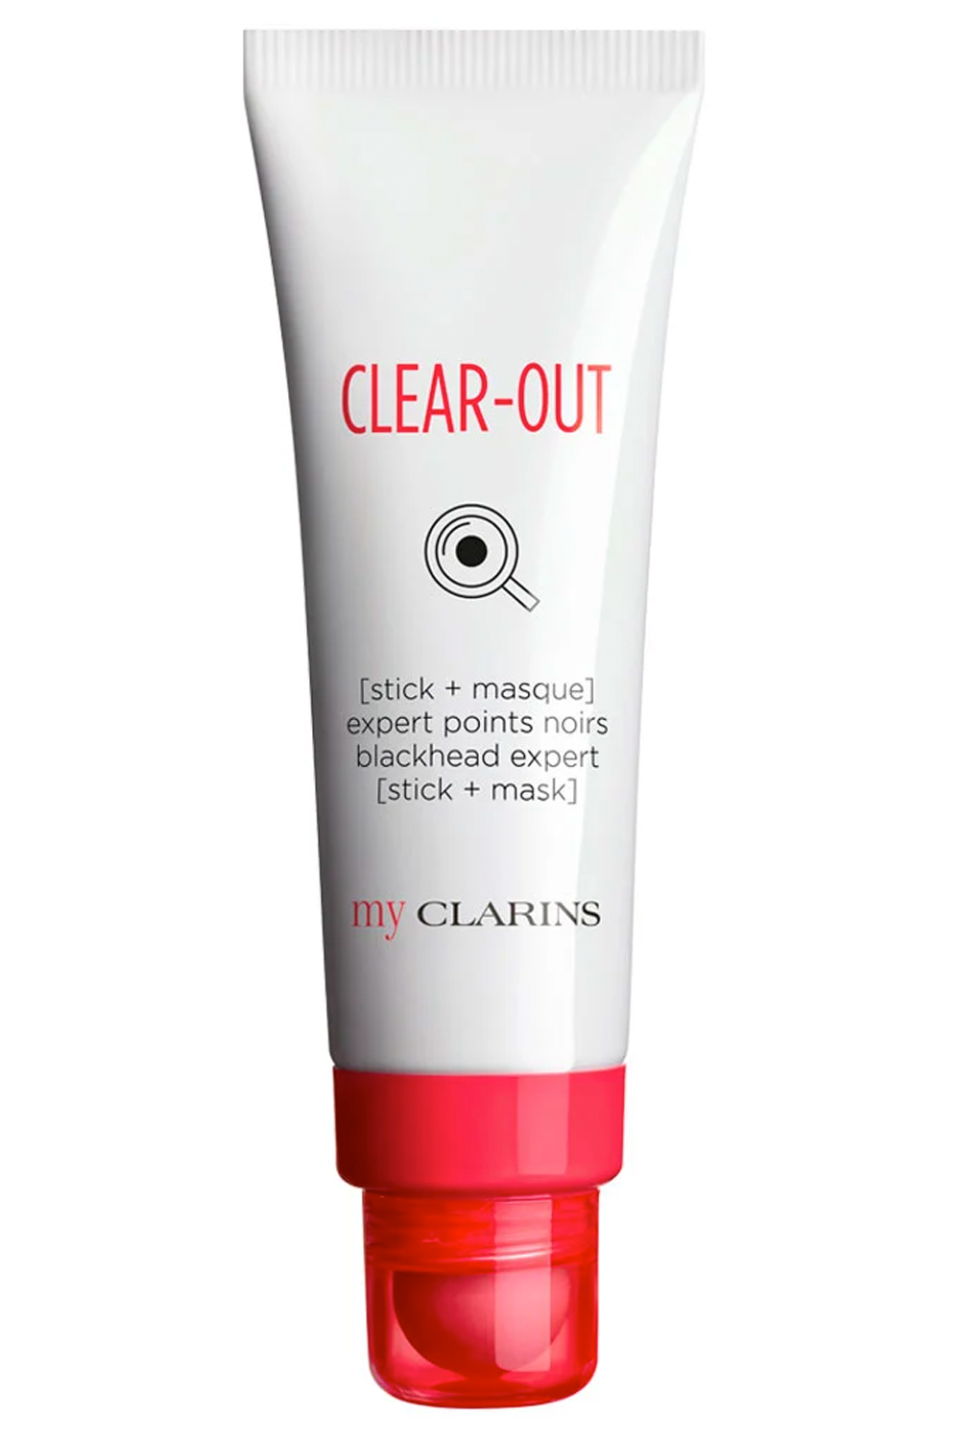 9) My Clarins Clear-Out Blackhead Expert Stick + Mask